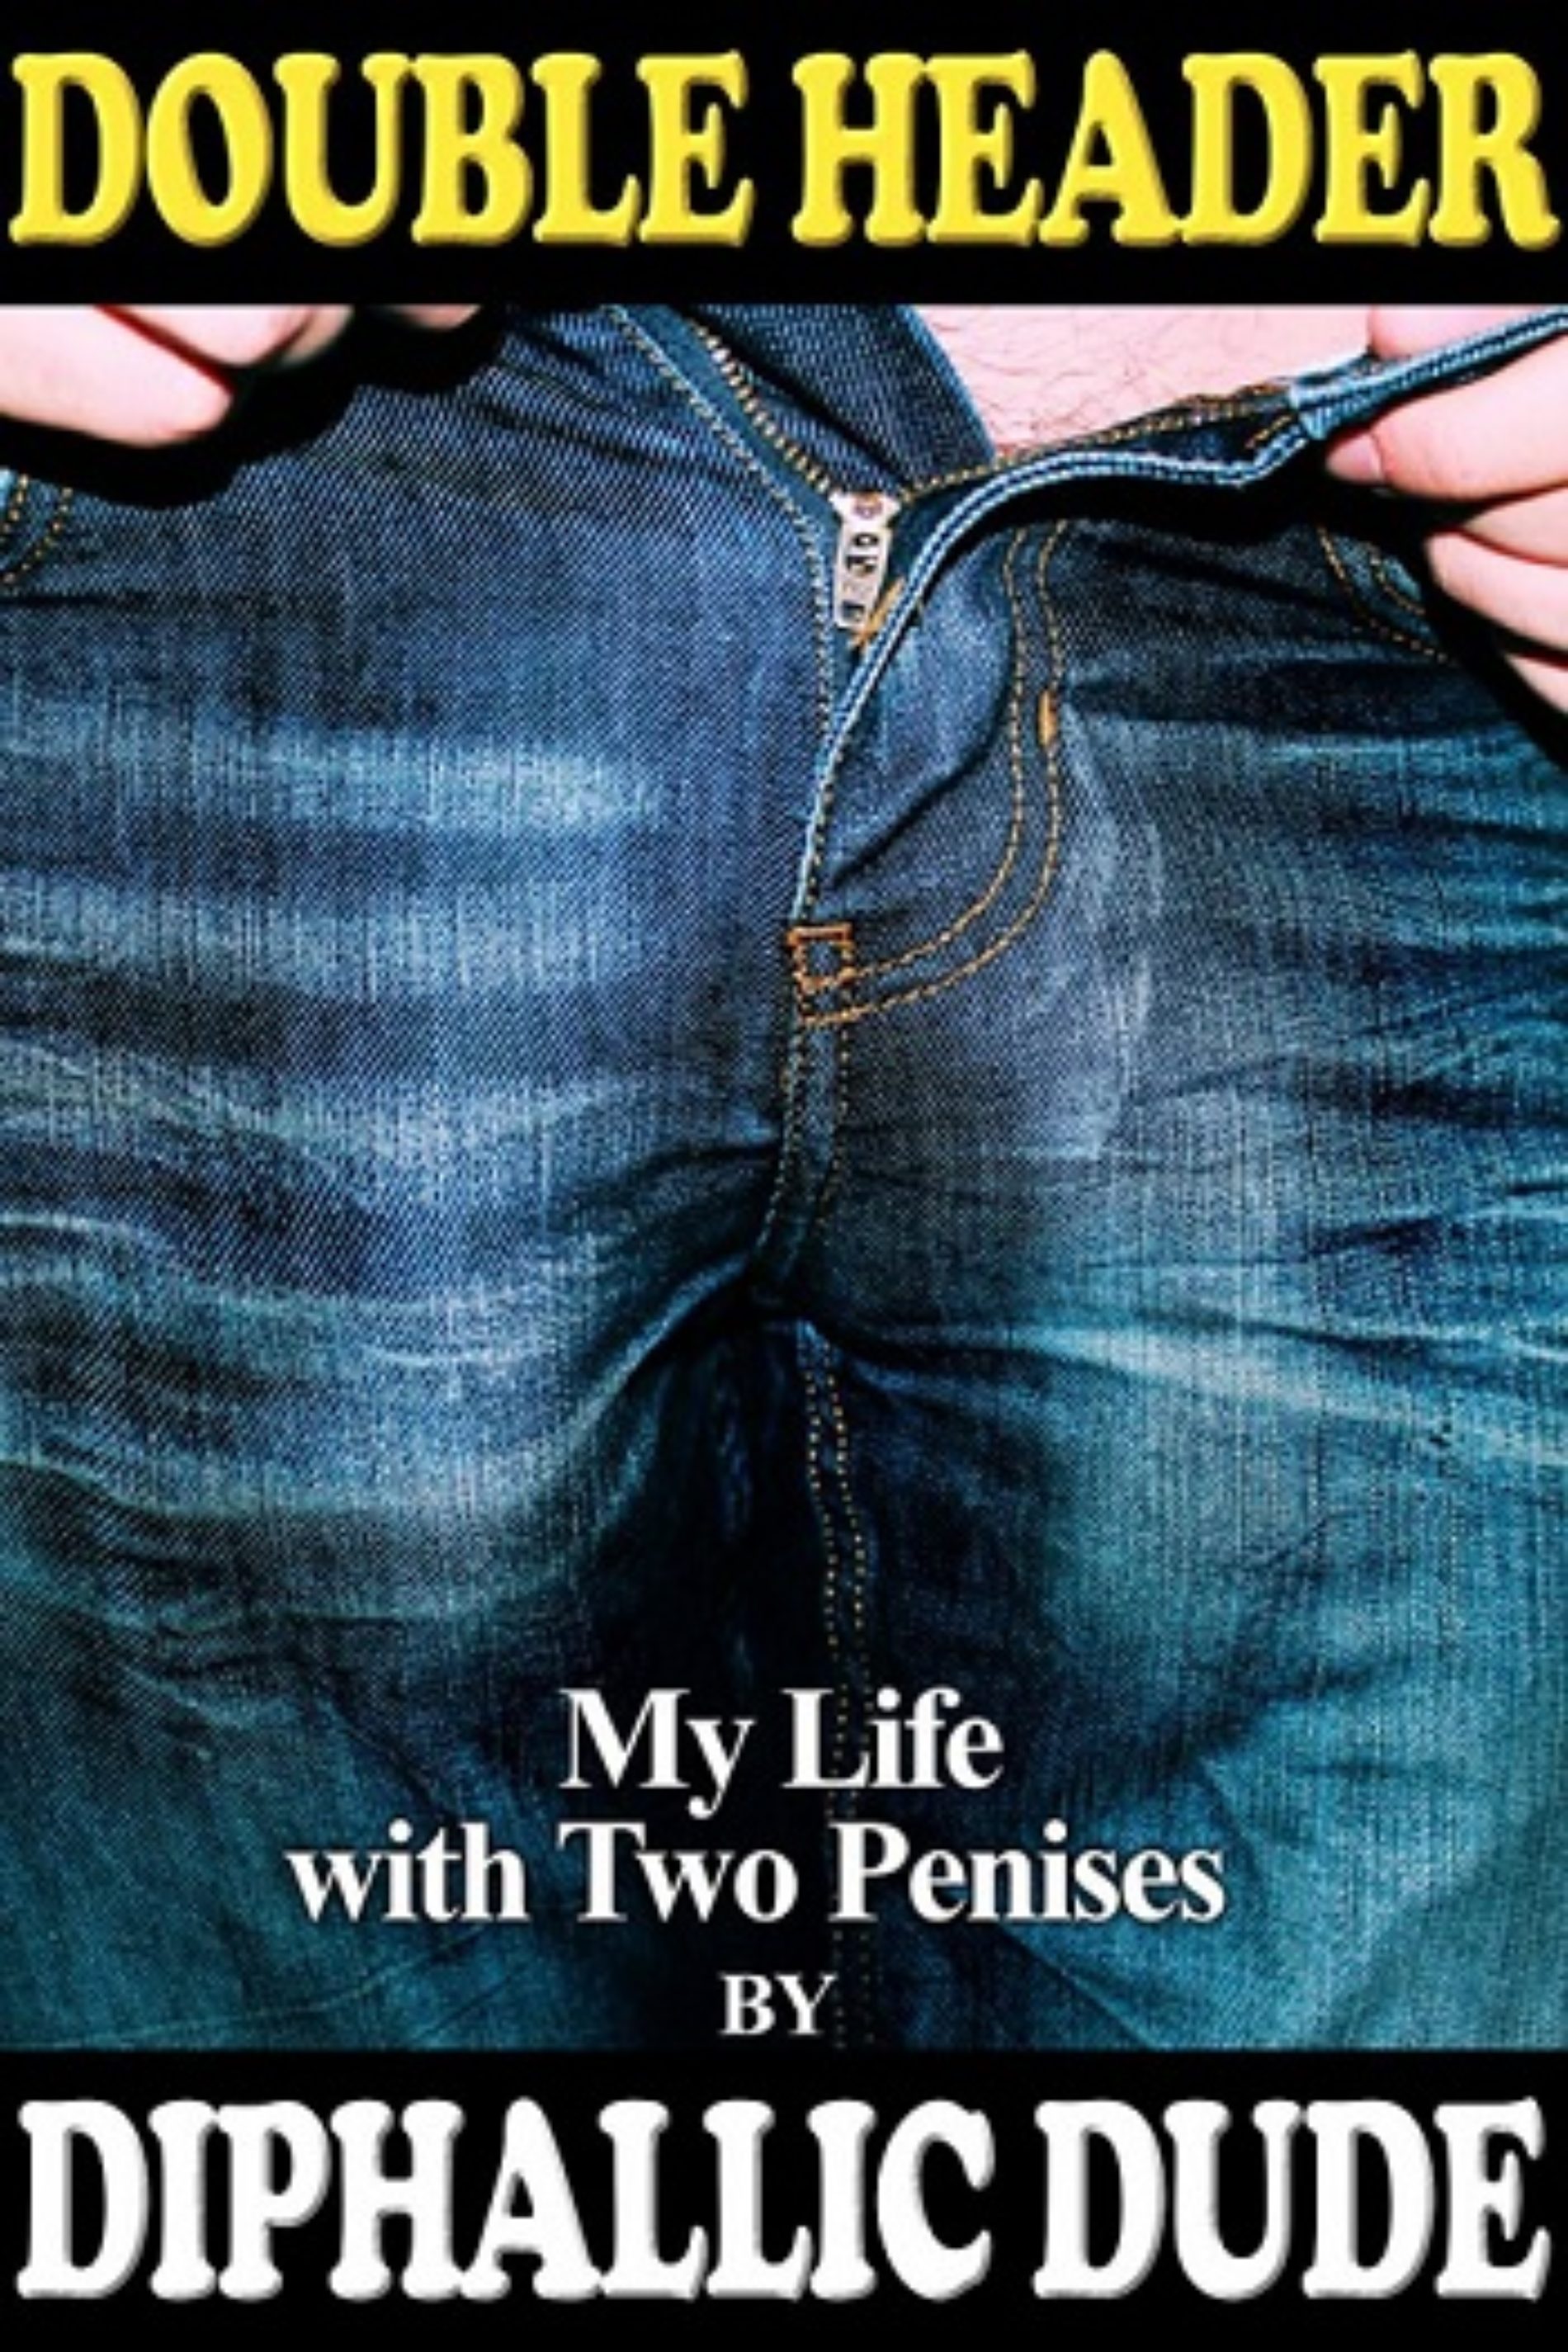 The Guy With Two Dicks Writes Book